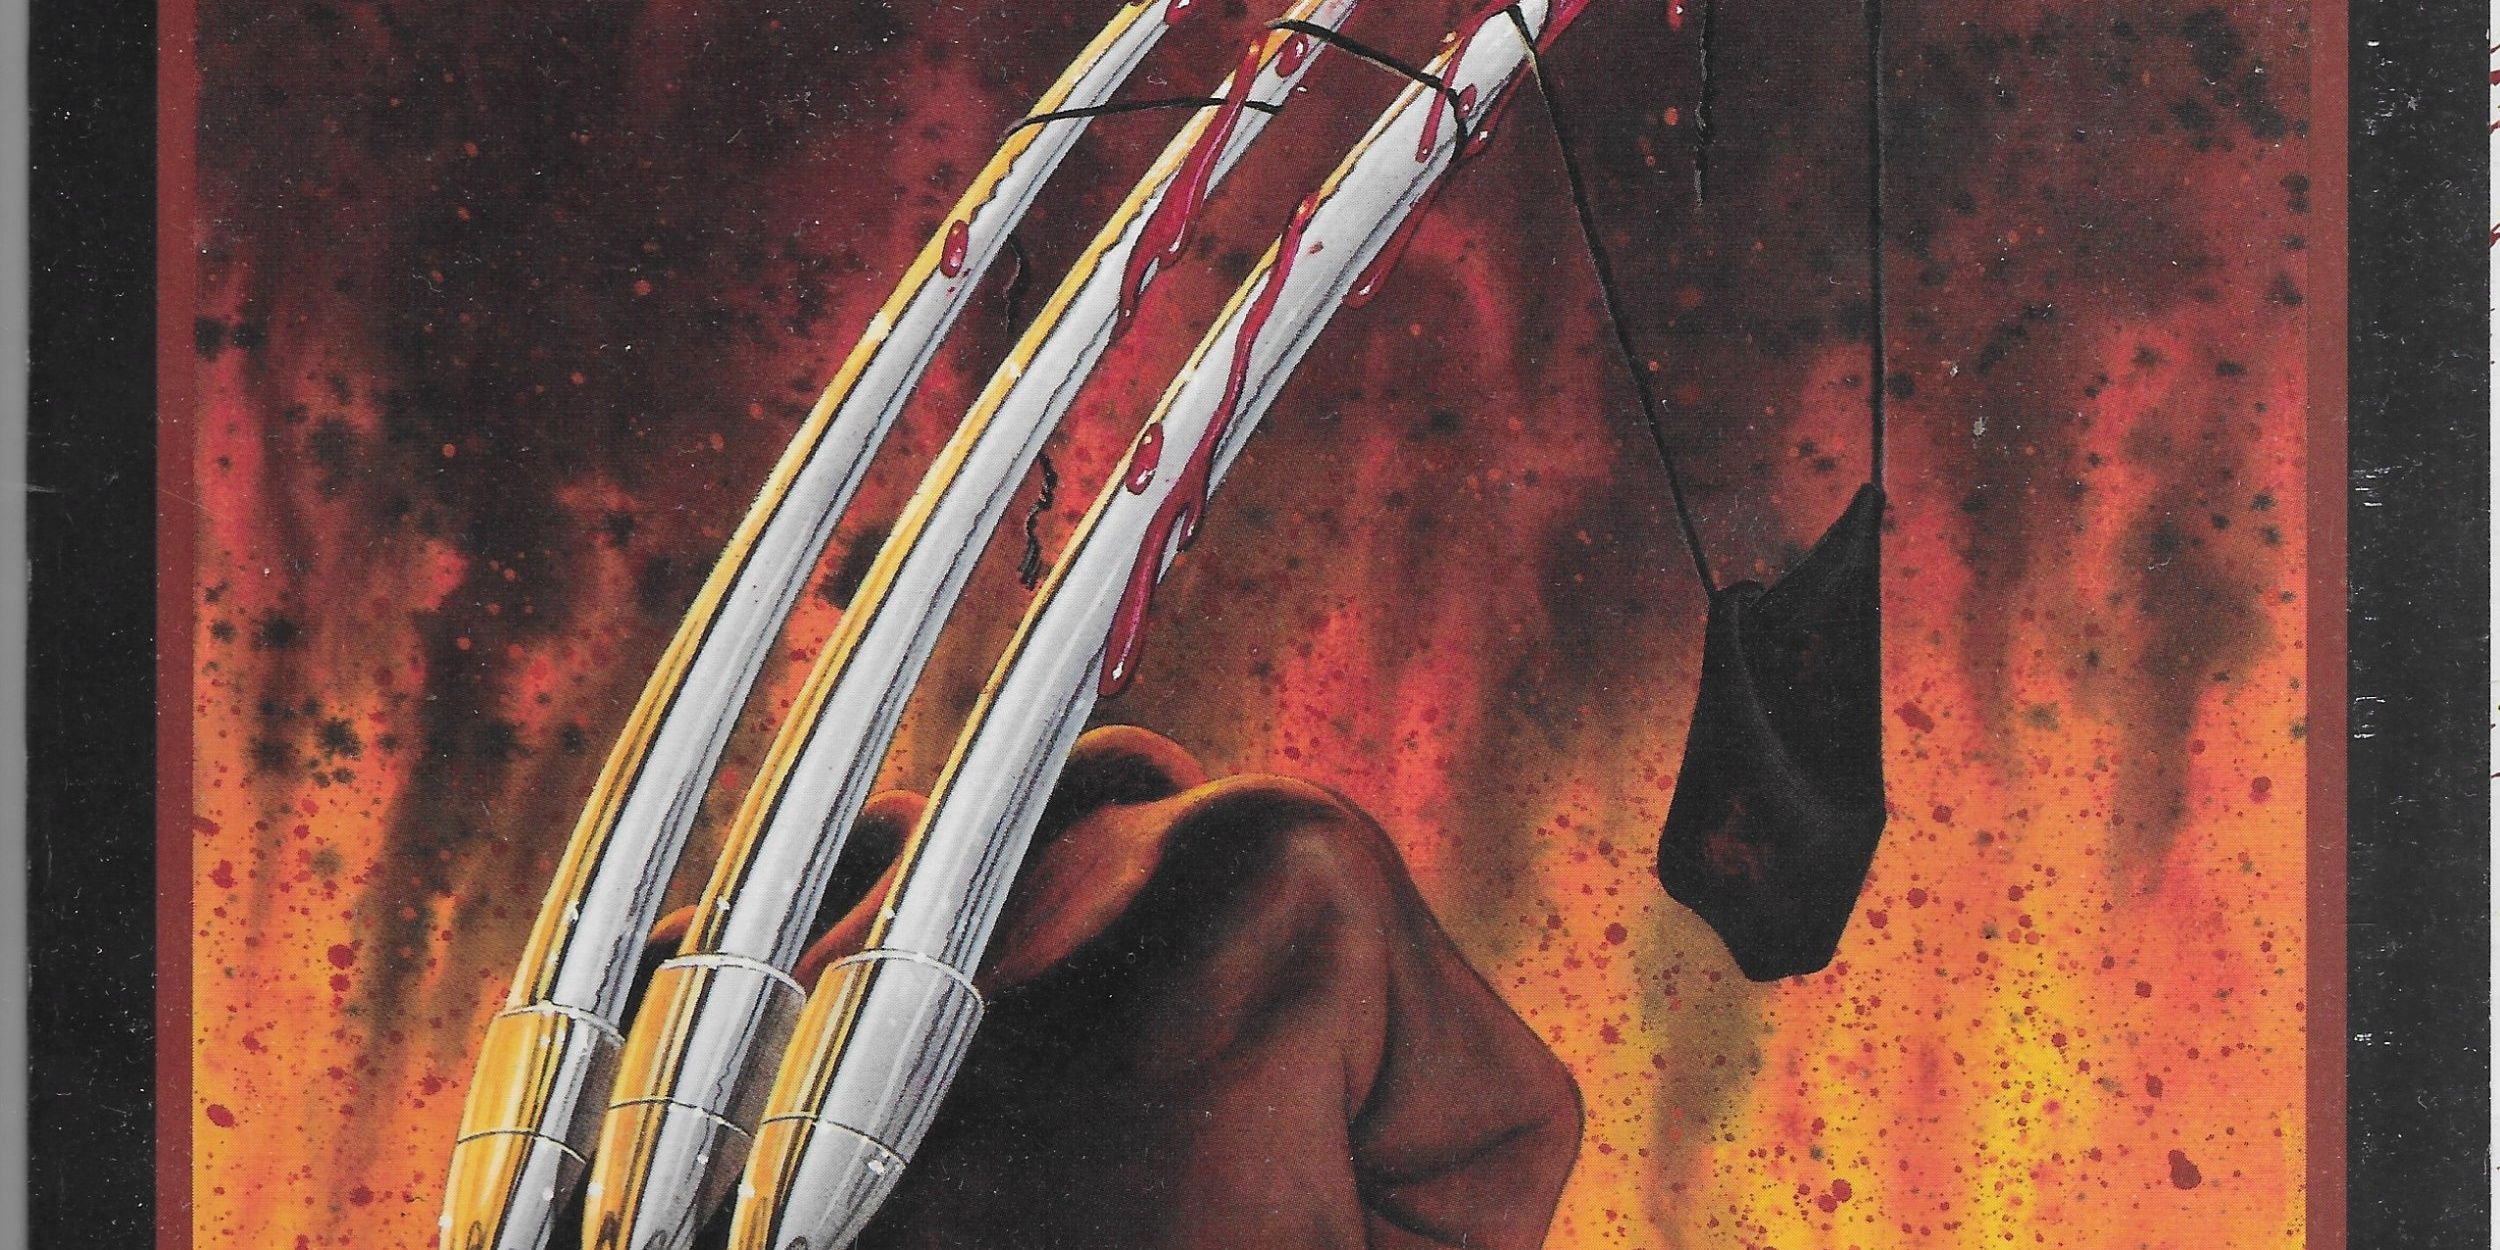 Wolverine's blood stained claws popping out of his hand in Marvel comics